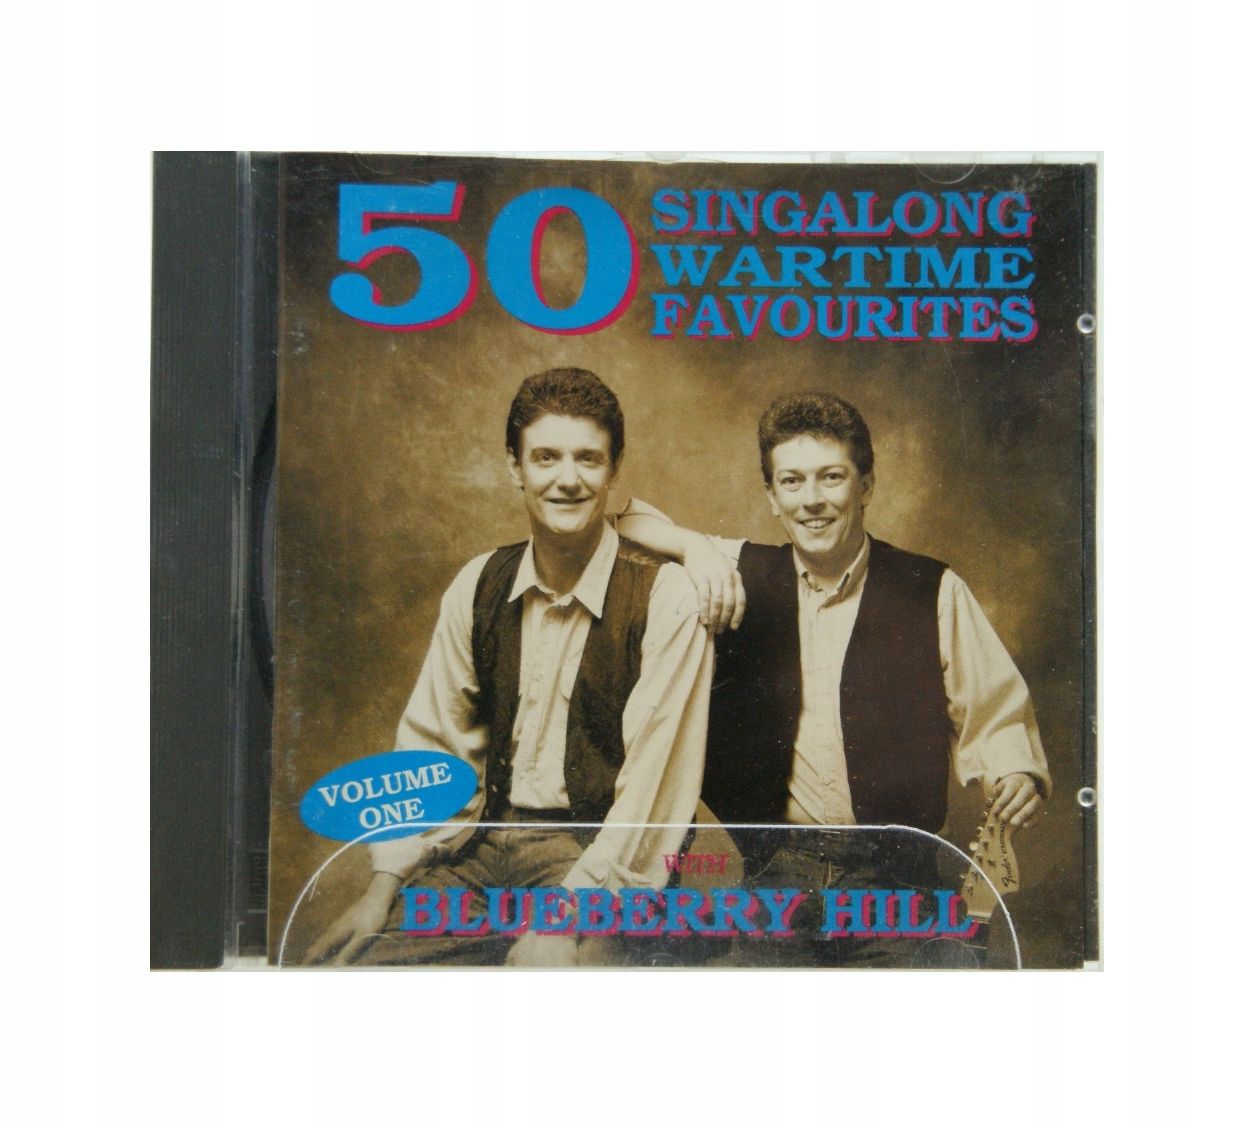 Cd - Various - Bluberry Hill 50 Singalong Wartime